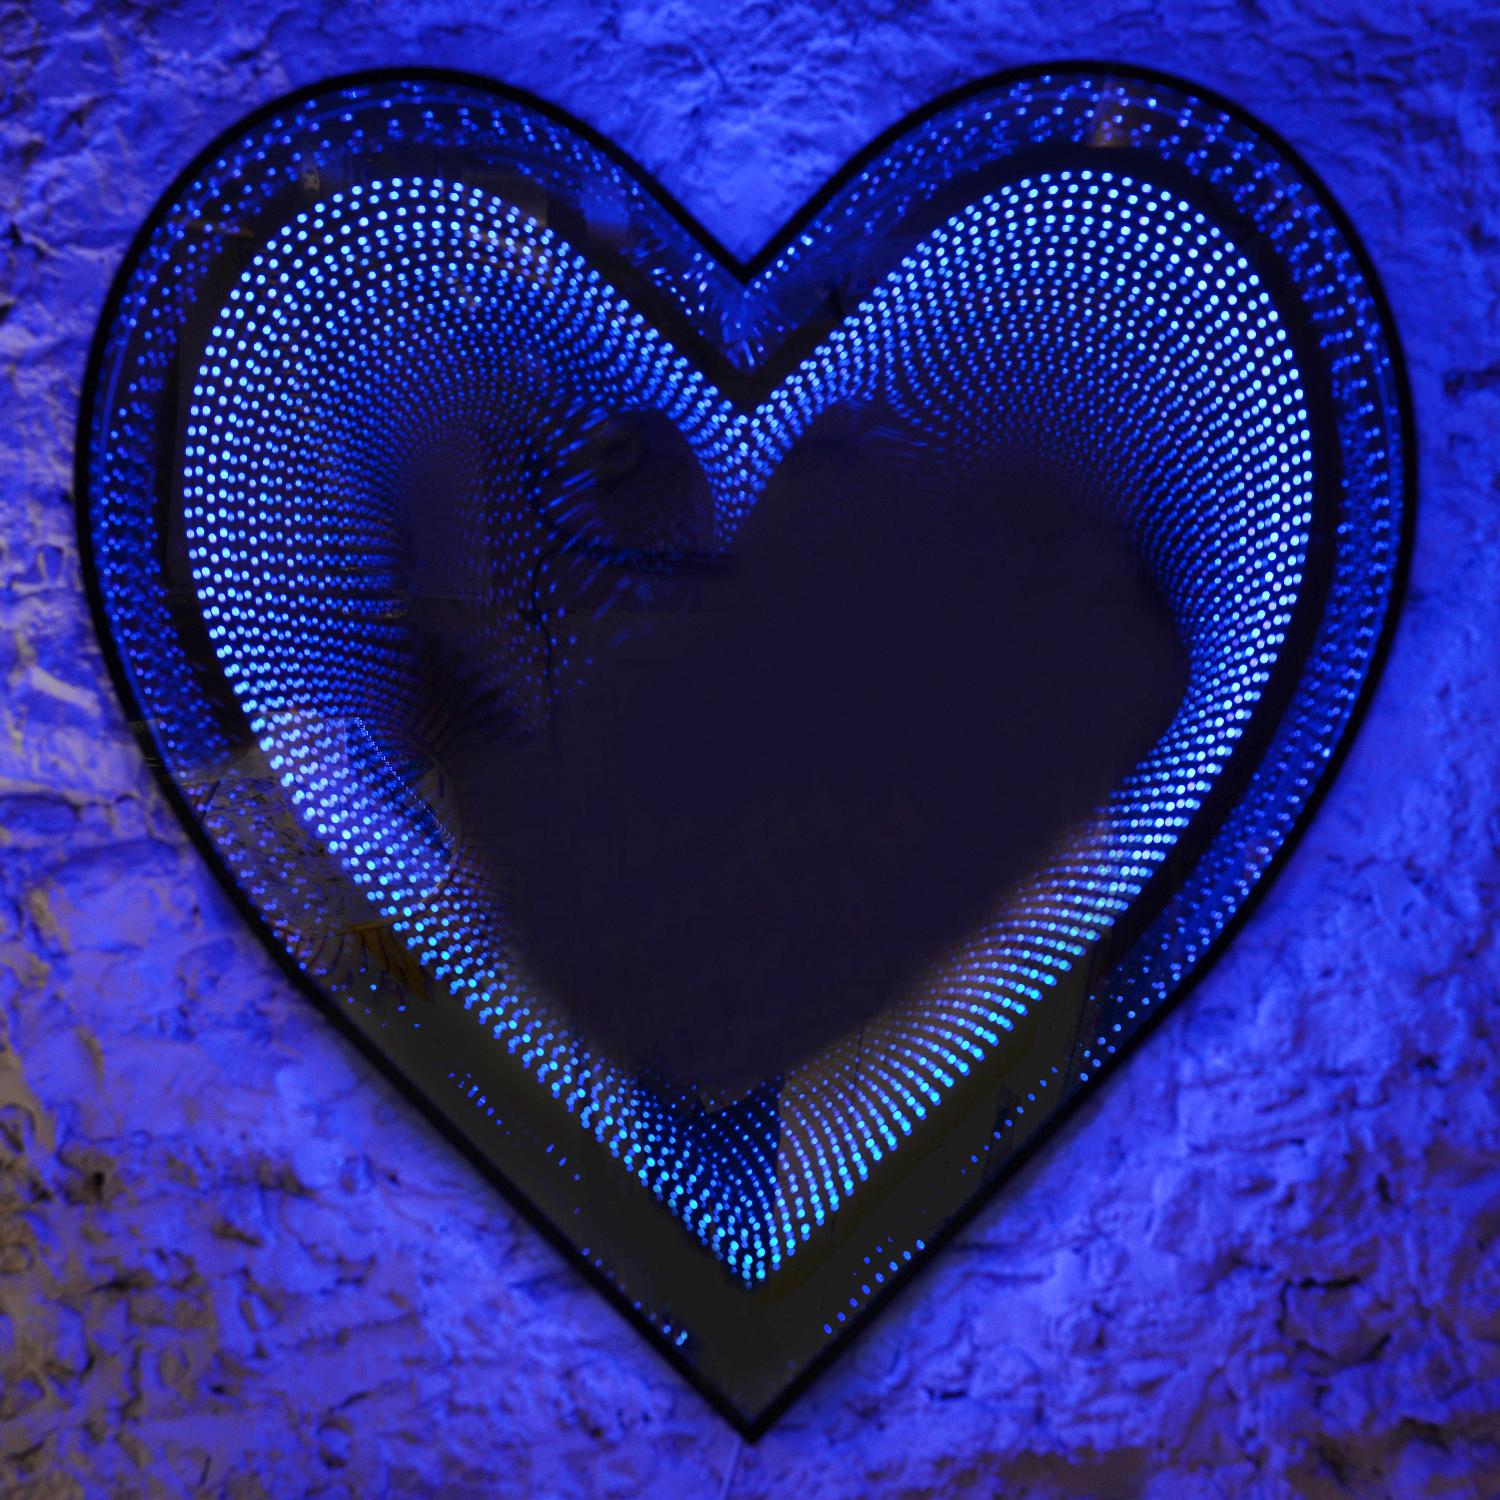 Mirror By Heart made with LED lights with mirrored glass 
and plexiglass creating an infiny mirrored effect through 
a heart shape. With colors changing option with remote control. 
Limited Edition of 15 pieces by Raphael Fenice.